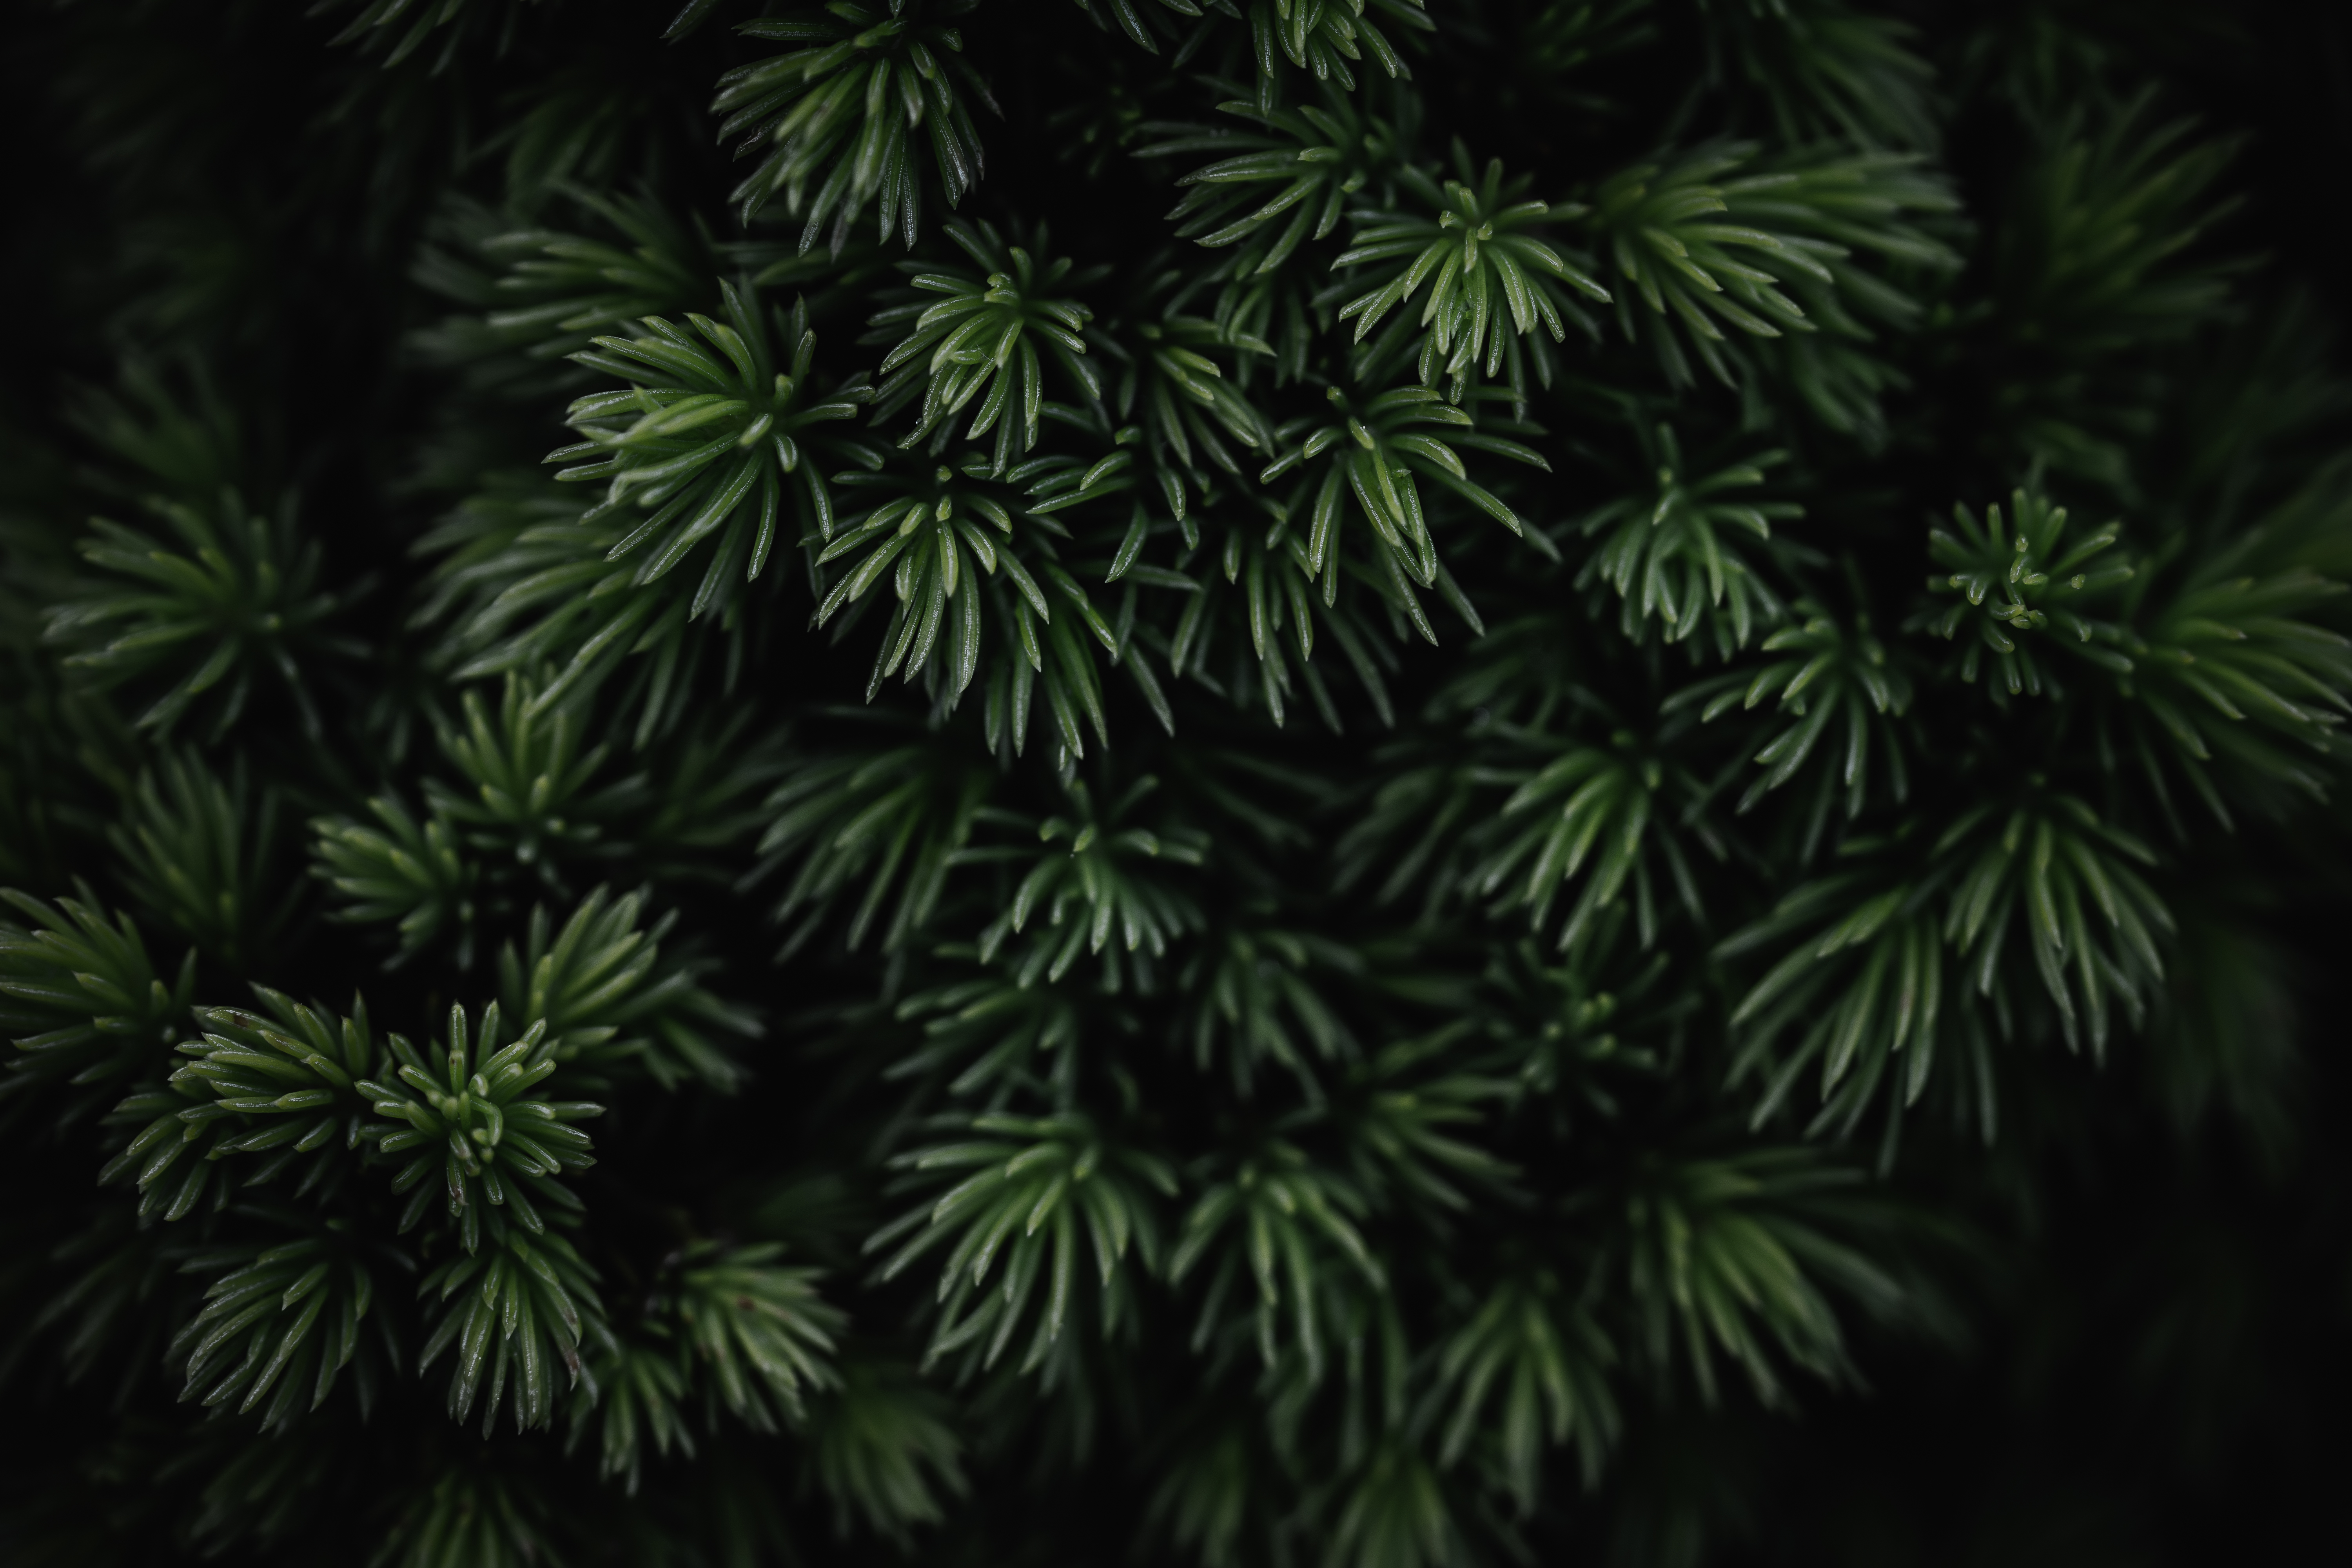 green pine forest background